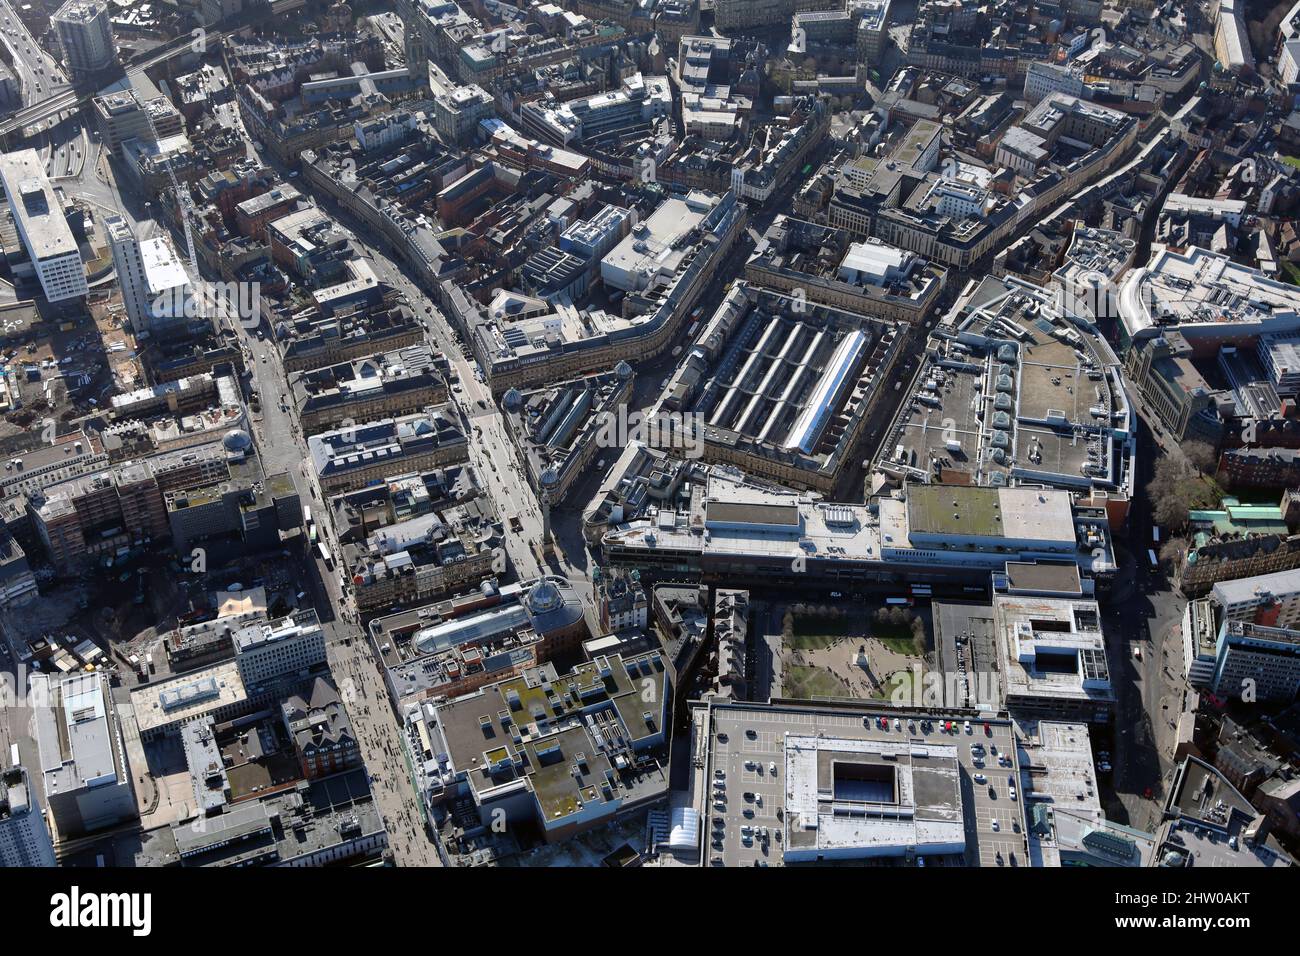 aerial view of Newcastle-upon-Tyne city centre from the North looking down Grainger Street, Tyne & Wear, UK Stock Photo